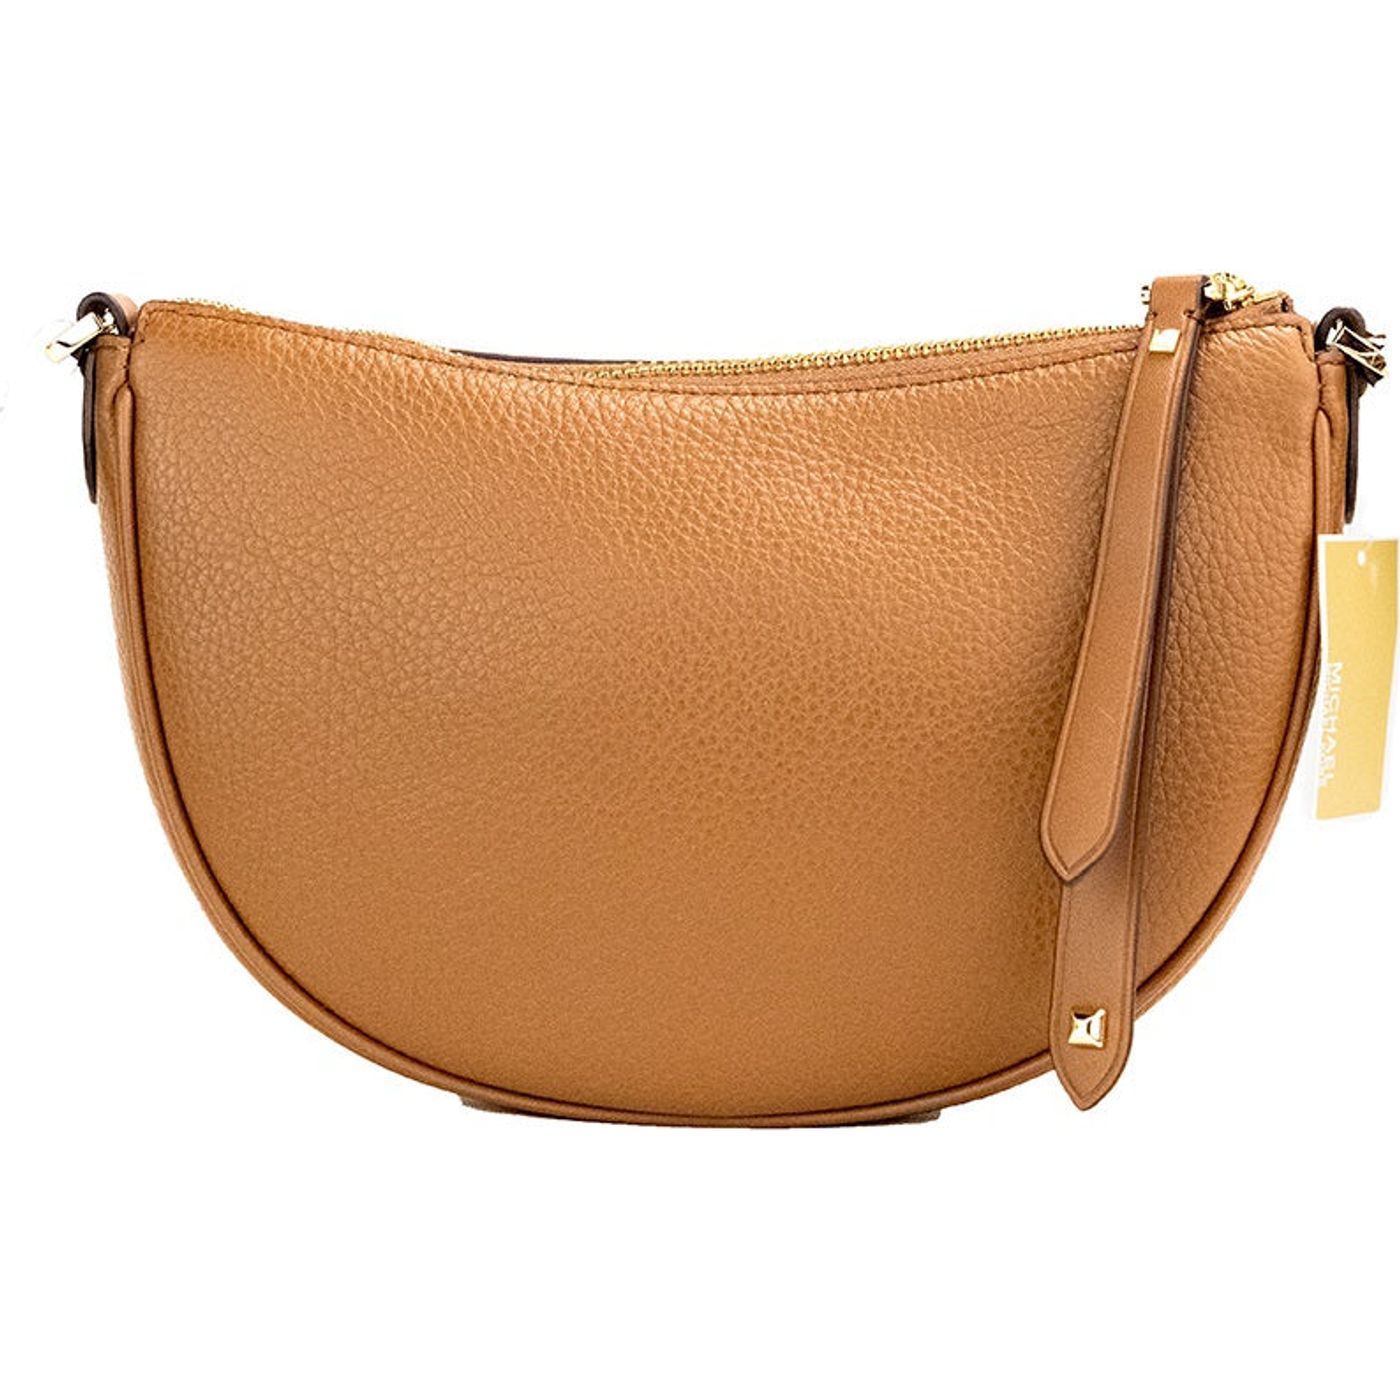 Michael Kors Dover Small Luggage Pebbled Leather Half Moon Crossbody Bag Purse dover-small-luggage-pebbled-leather-half-moon-crossbody-bag-purse